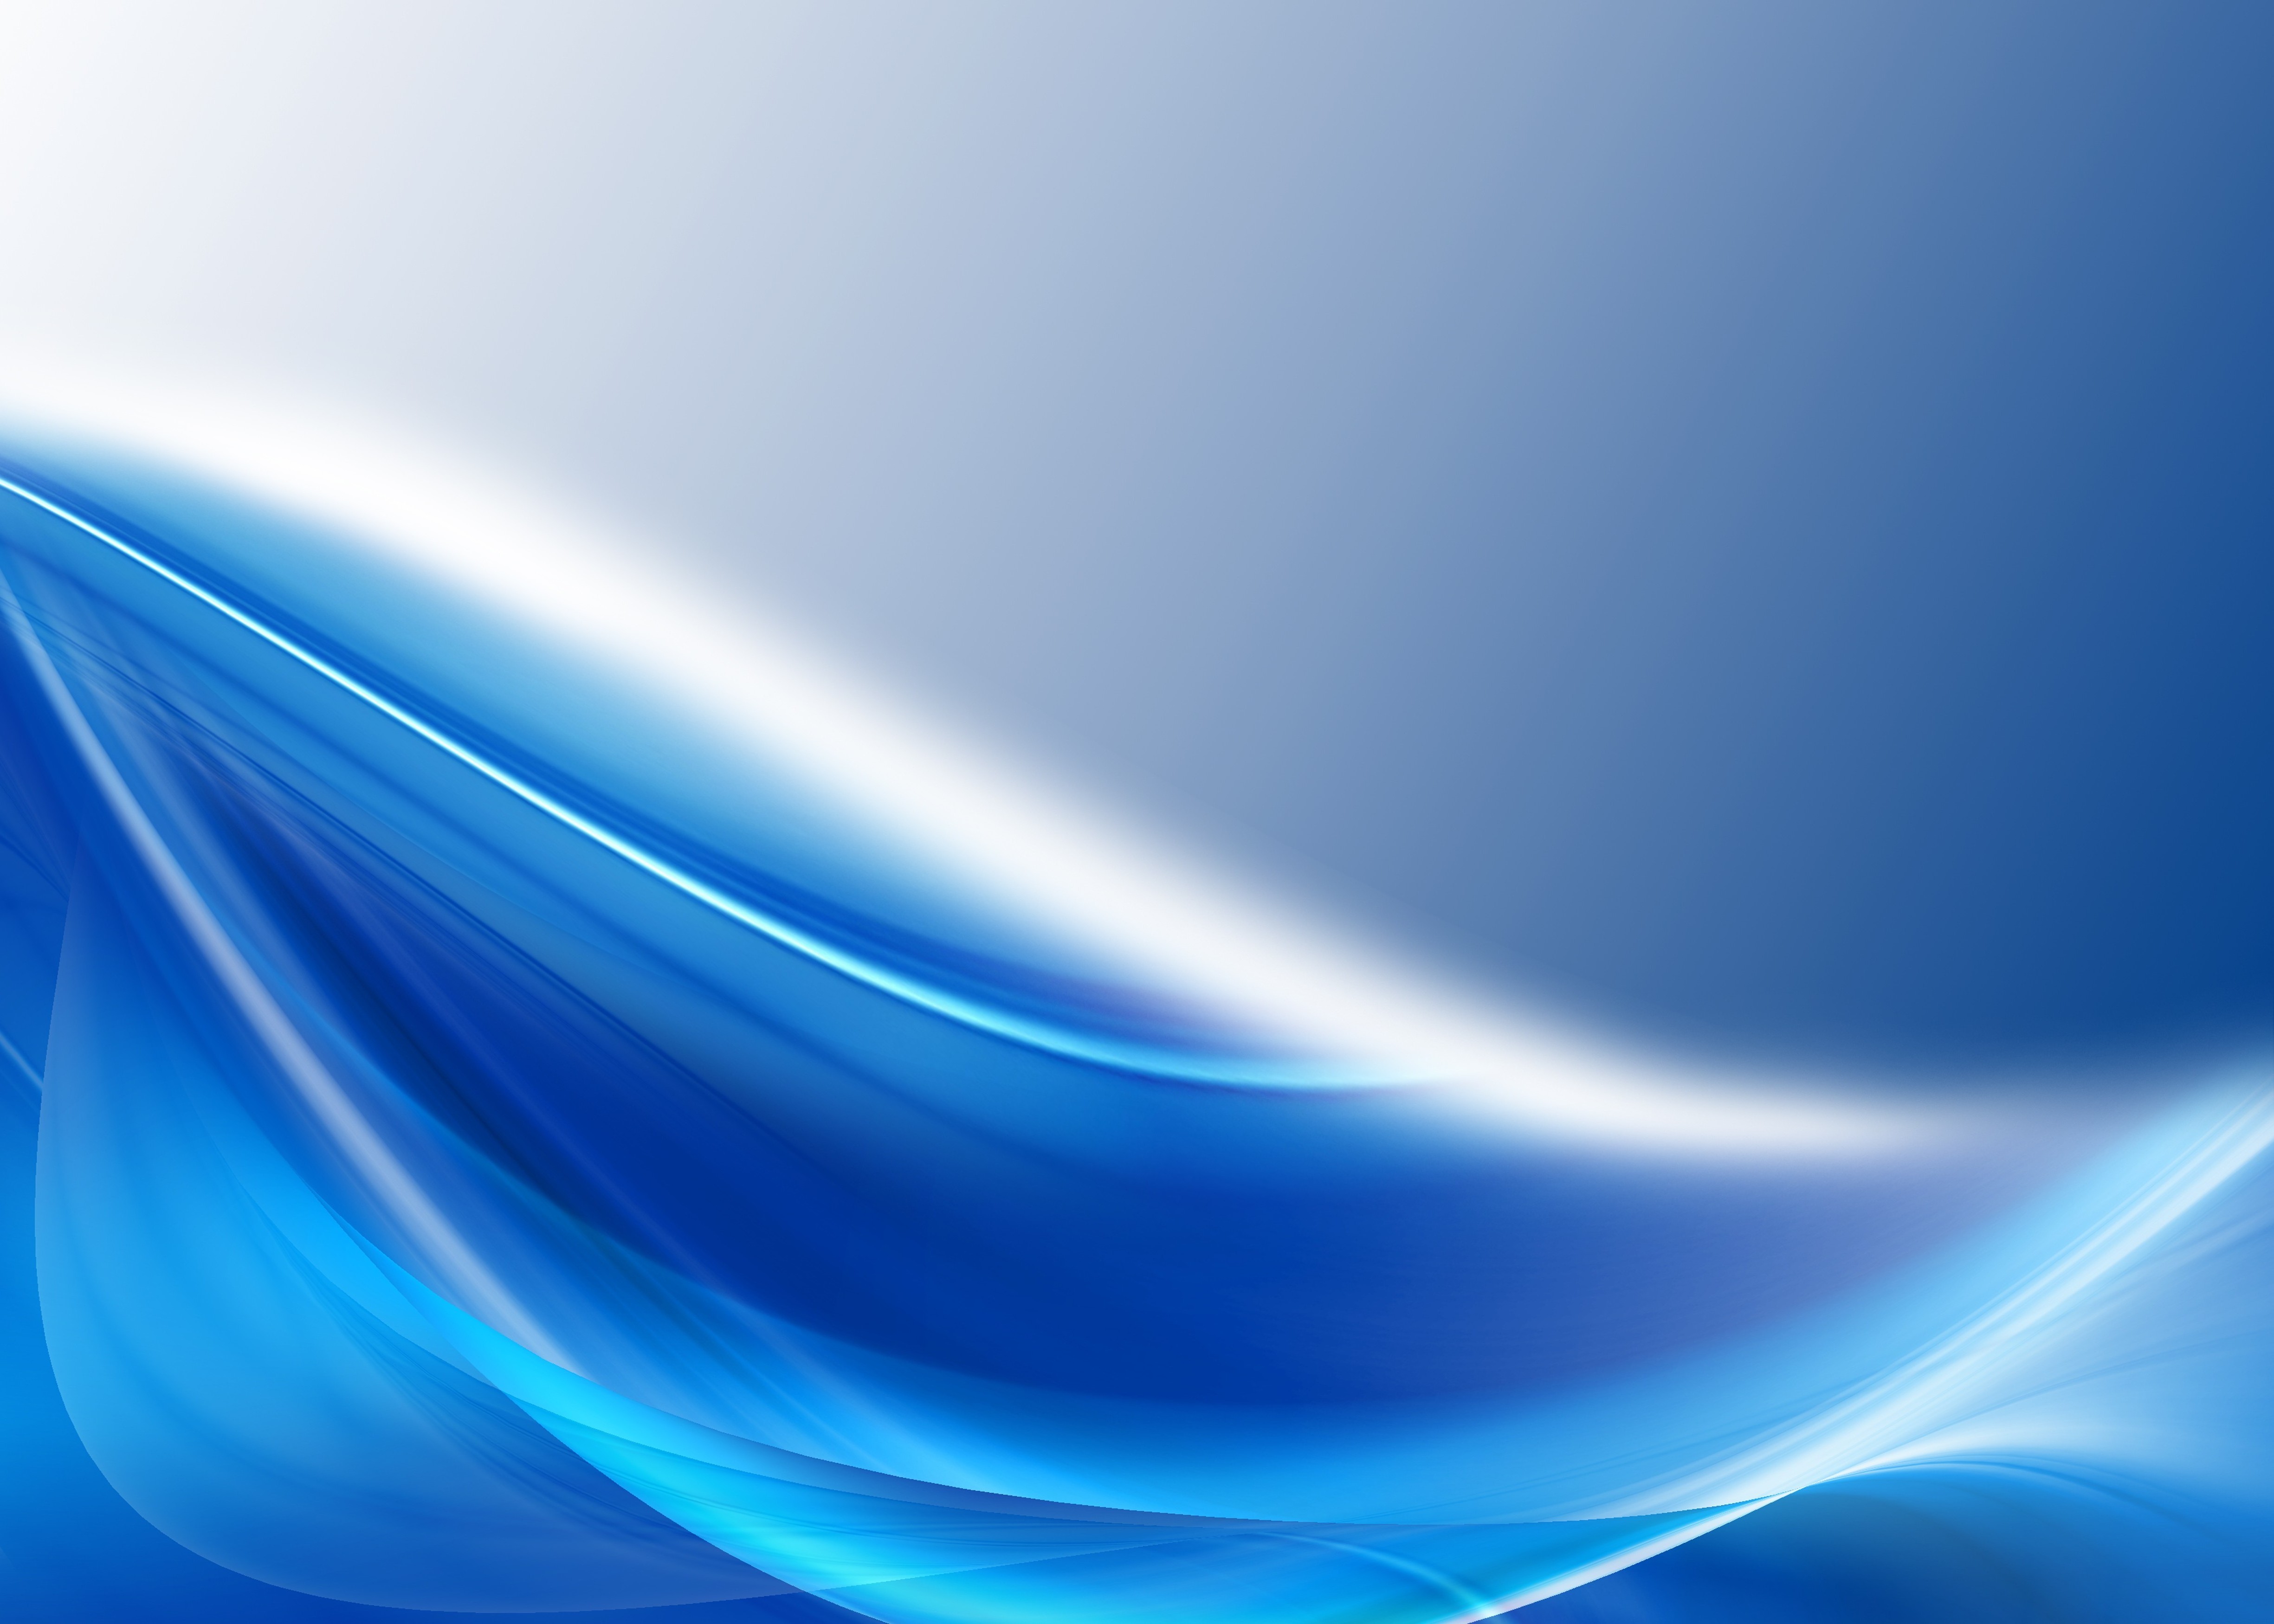 Abstract Blue Backgrounds - WallpaperSafari